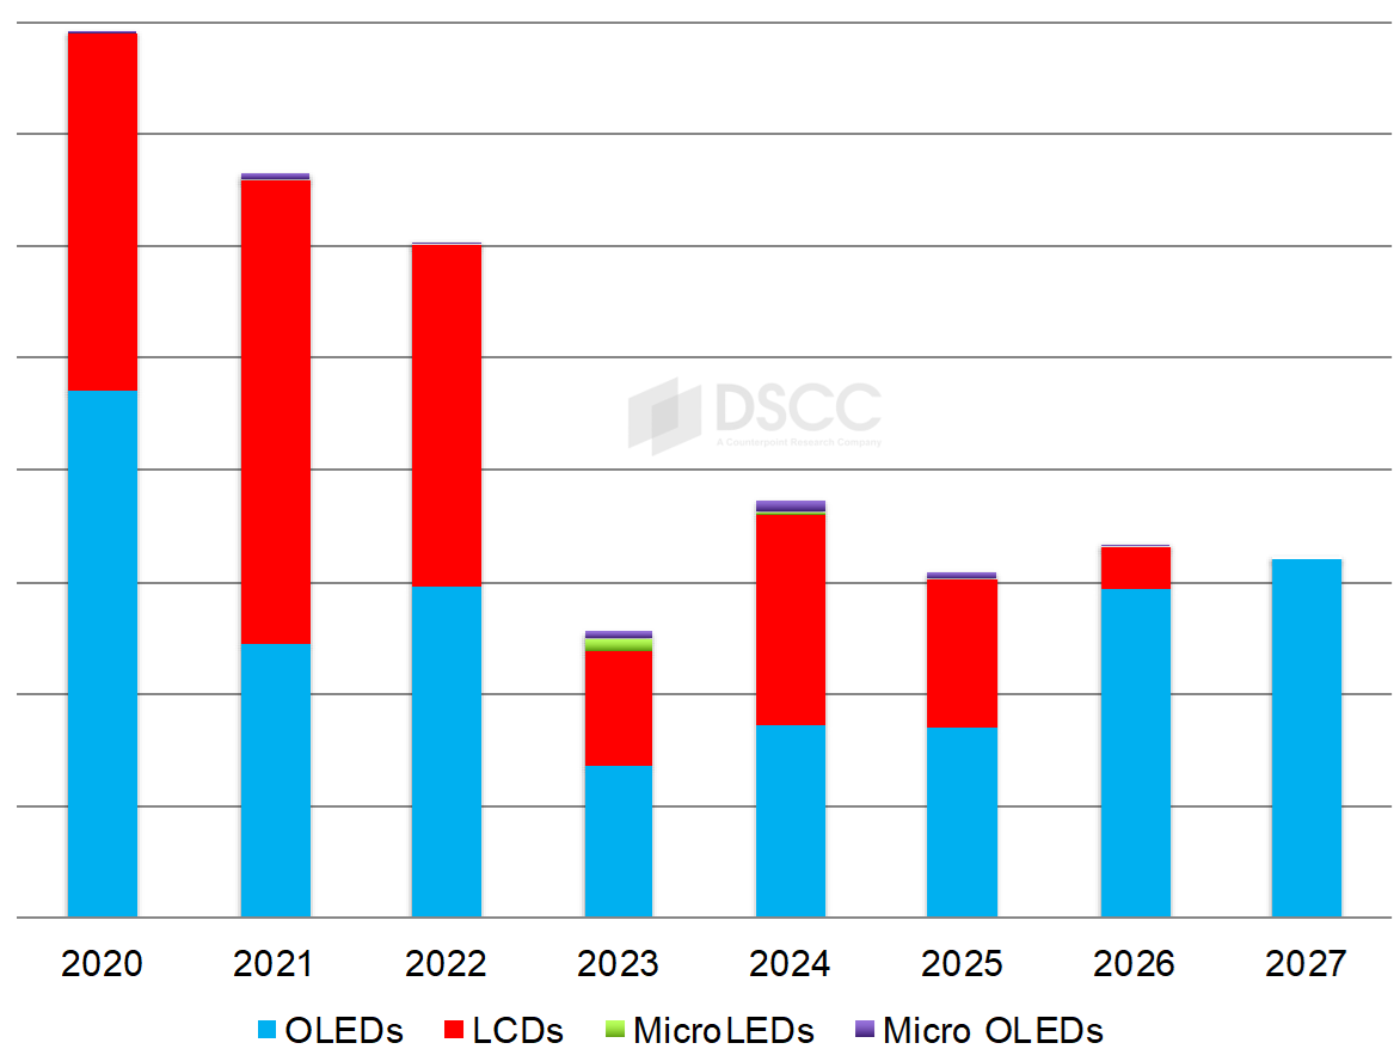 Source: DSCC’s Quarterly Display Capex and Equipment Market Share Report. *For MicroLEDs, only covers glass based equipment. For Micro OLEDs, covers OLED frontplane, color filter and limited backplane equipment.